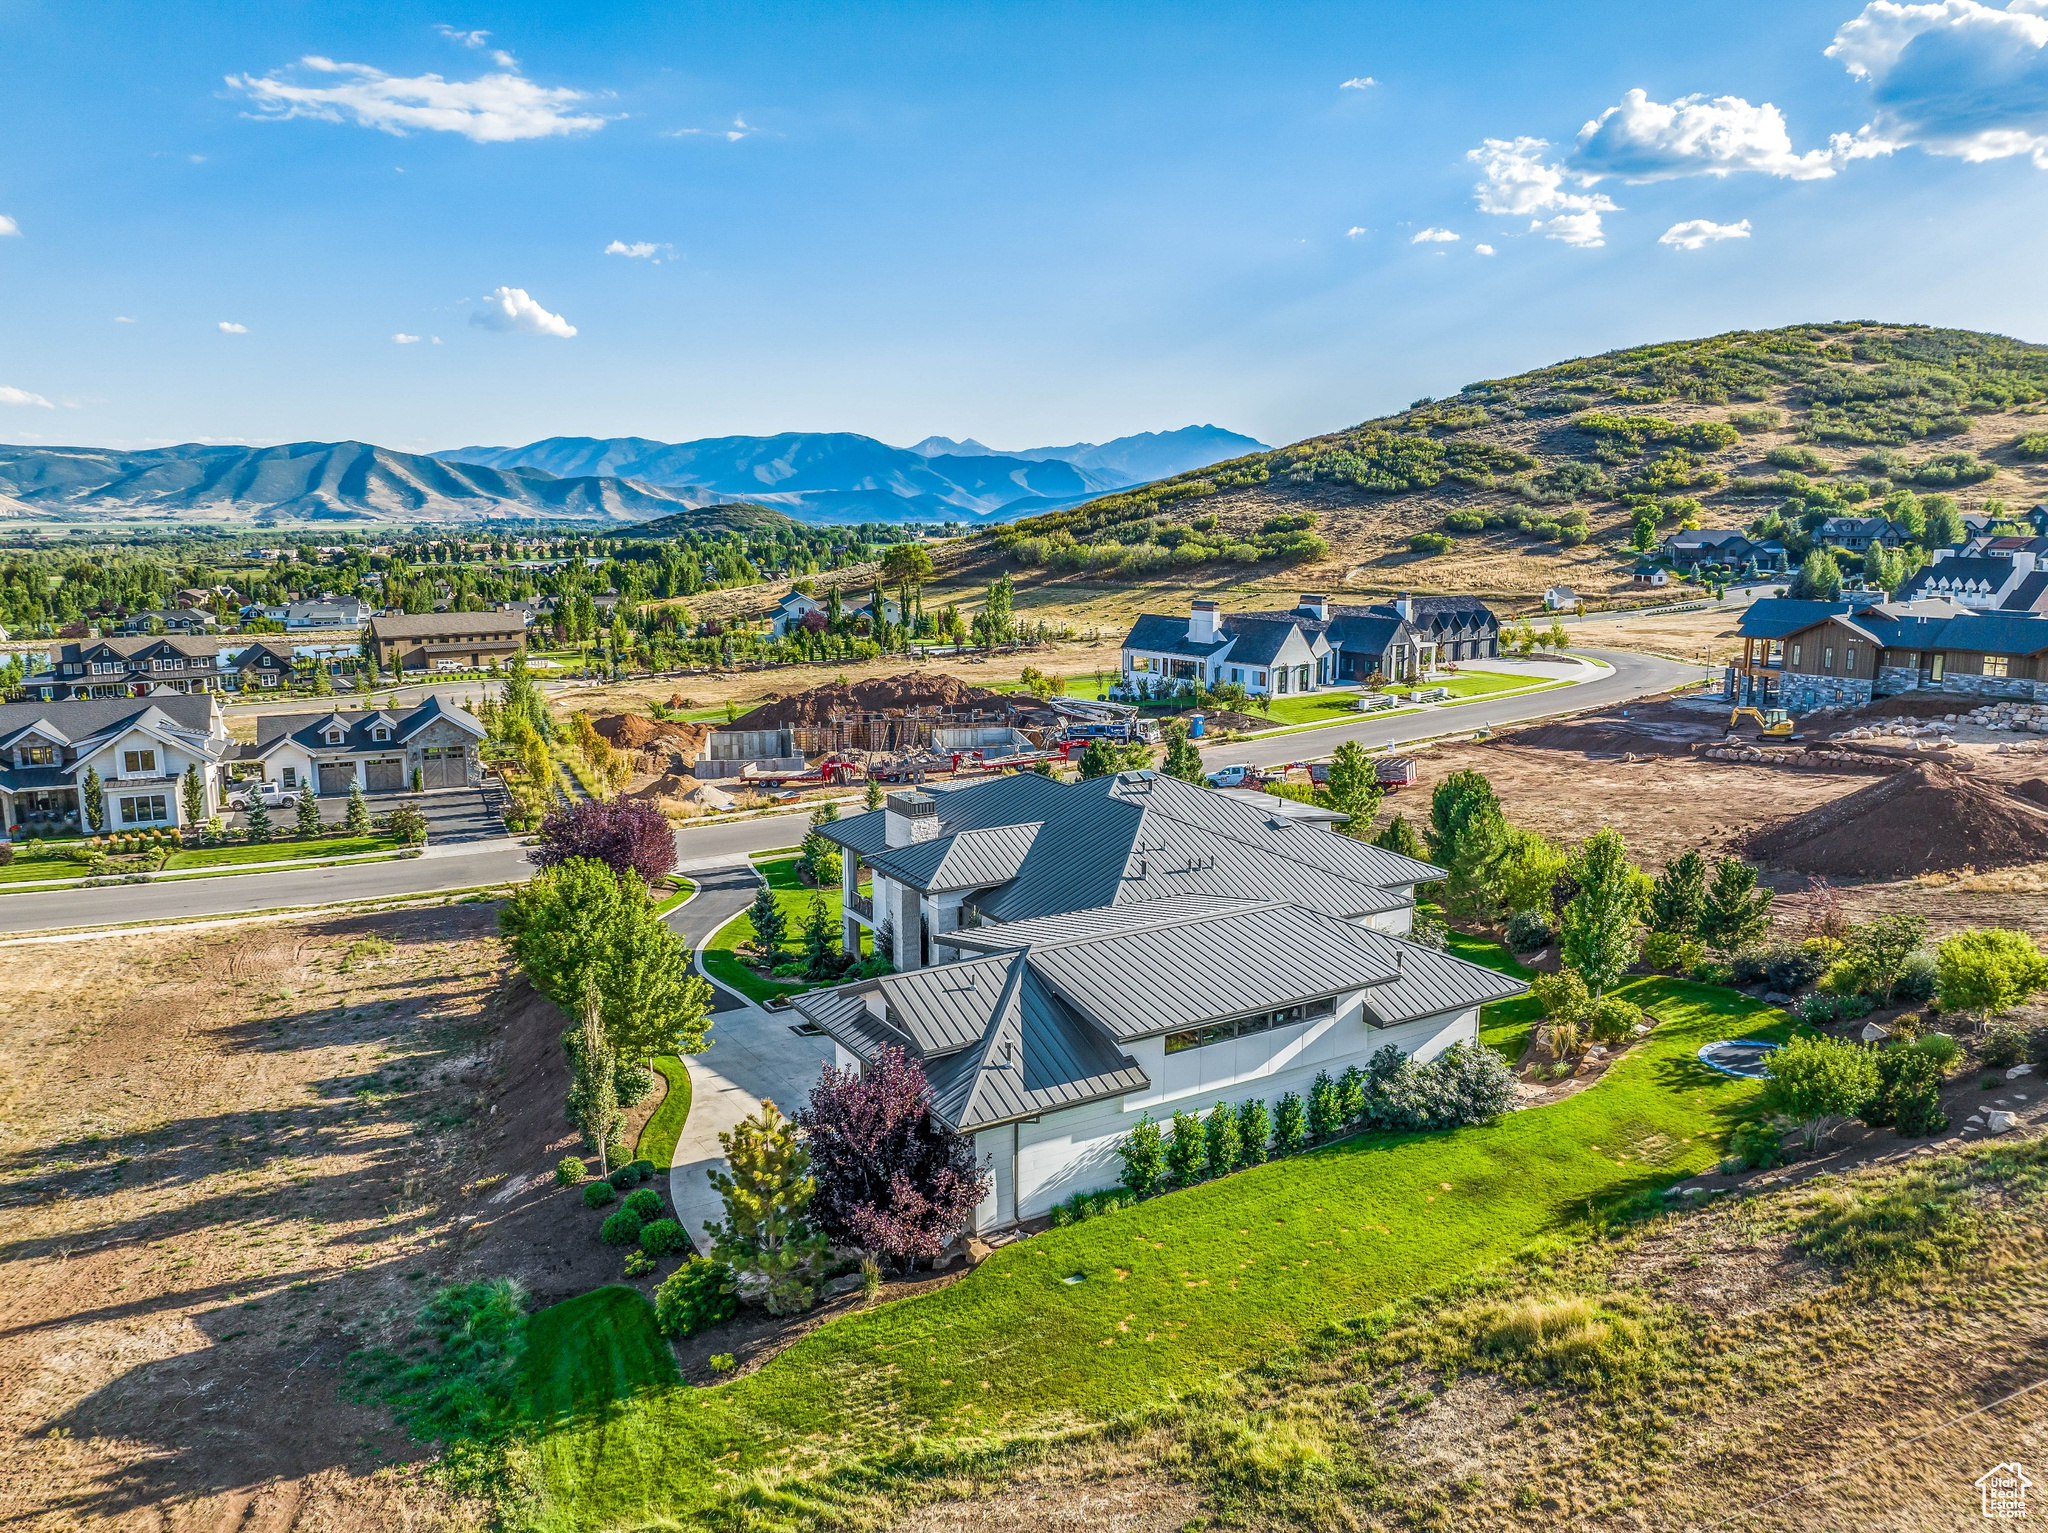 611 E DUTCH MOUNTAIN, Midway, Utah 84049, 5 Bedrooms Bedrooms, 23 Rooms Rooms,5 BathroomsBathrooms,Residential,For sale,DUTCH MOUNTAIN,1980711